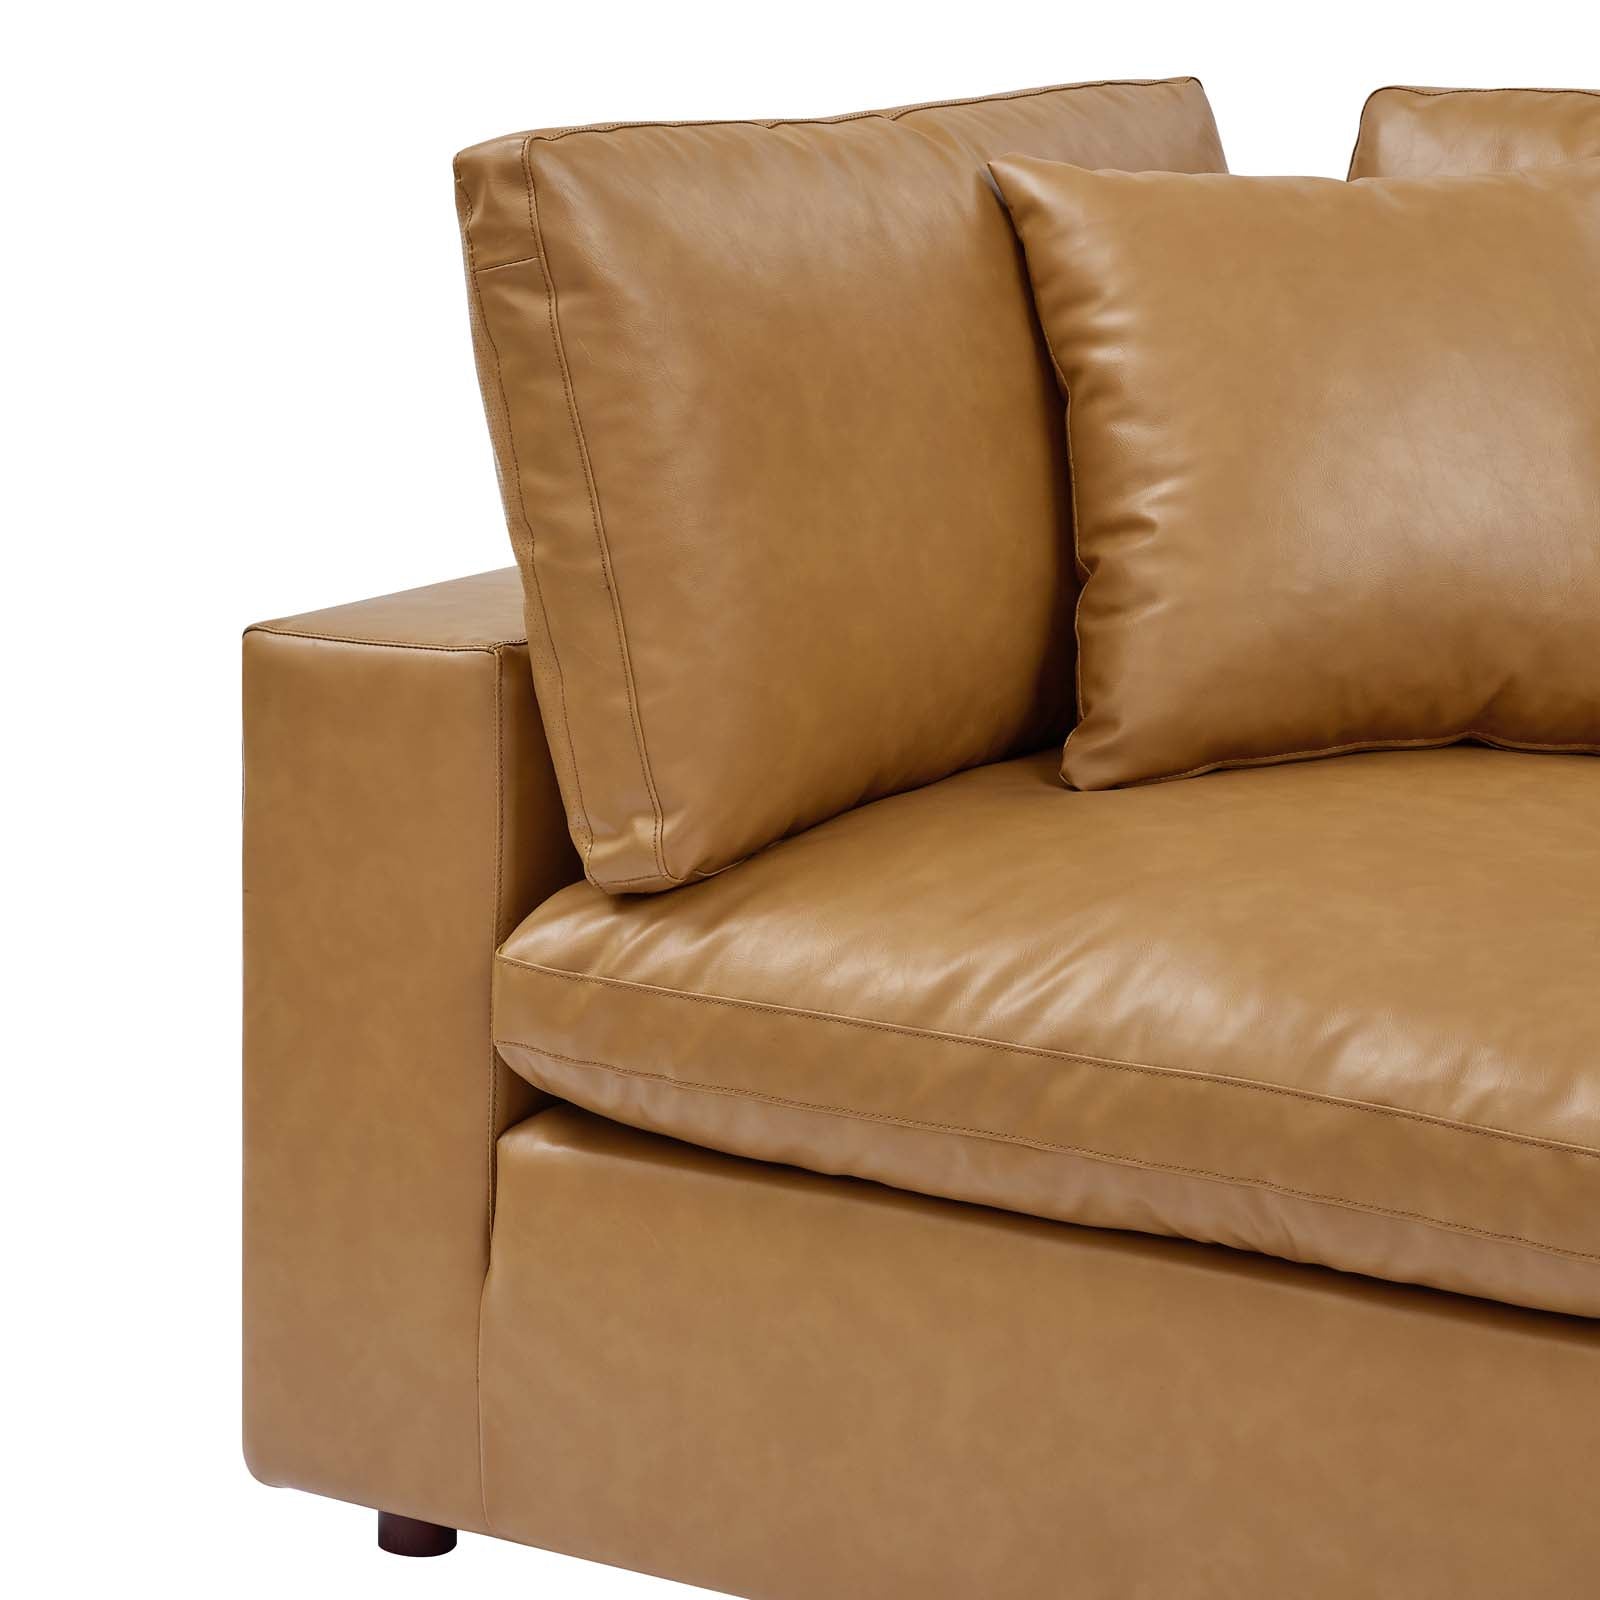 Modway Accent Chairs - Commix Down Filled Overstuffed Vegan Leather Corner Chair Tan